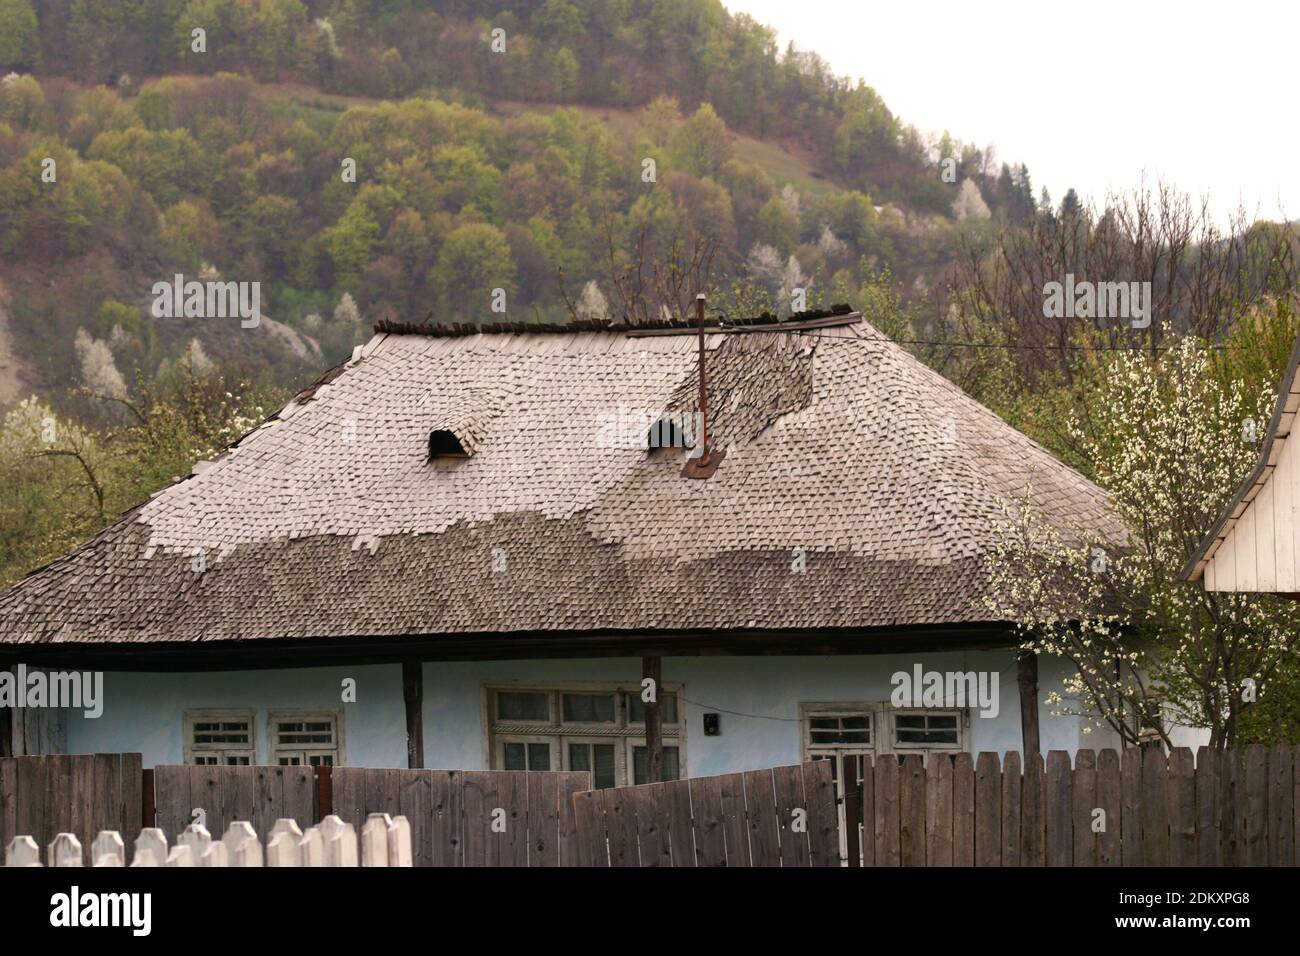 Vrancea County, Romania. Old house built in the traditional style, with wood shingle roof. Stock Photo